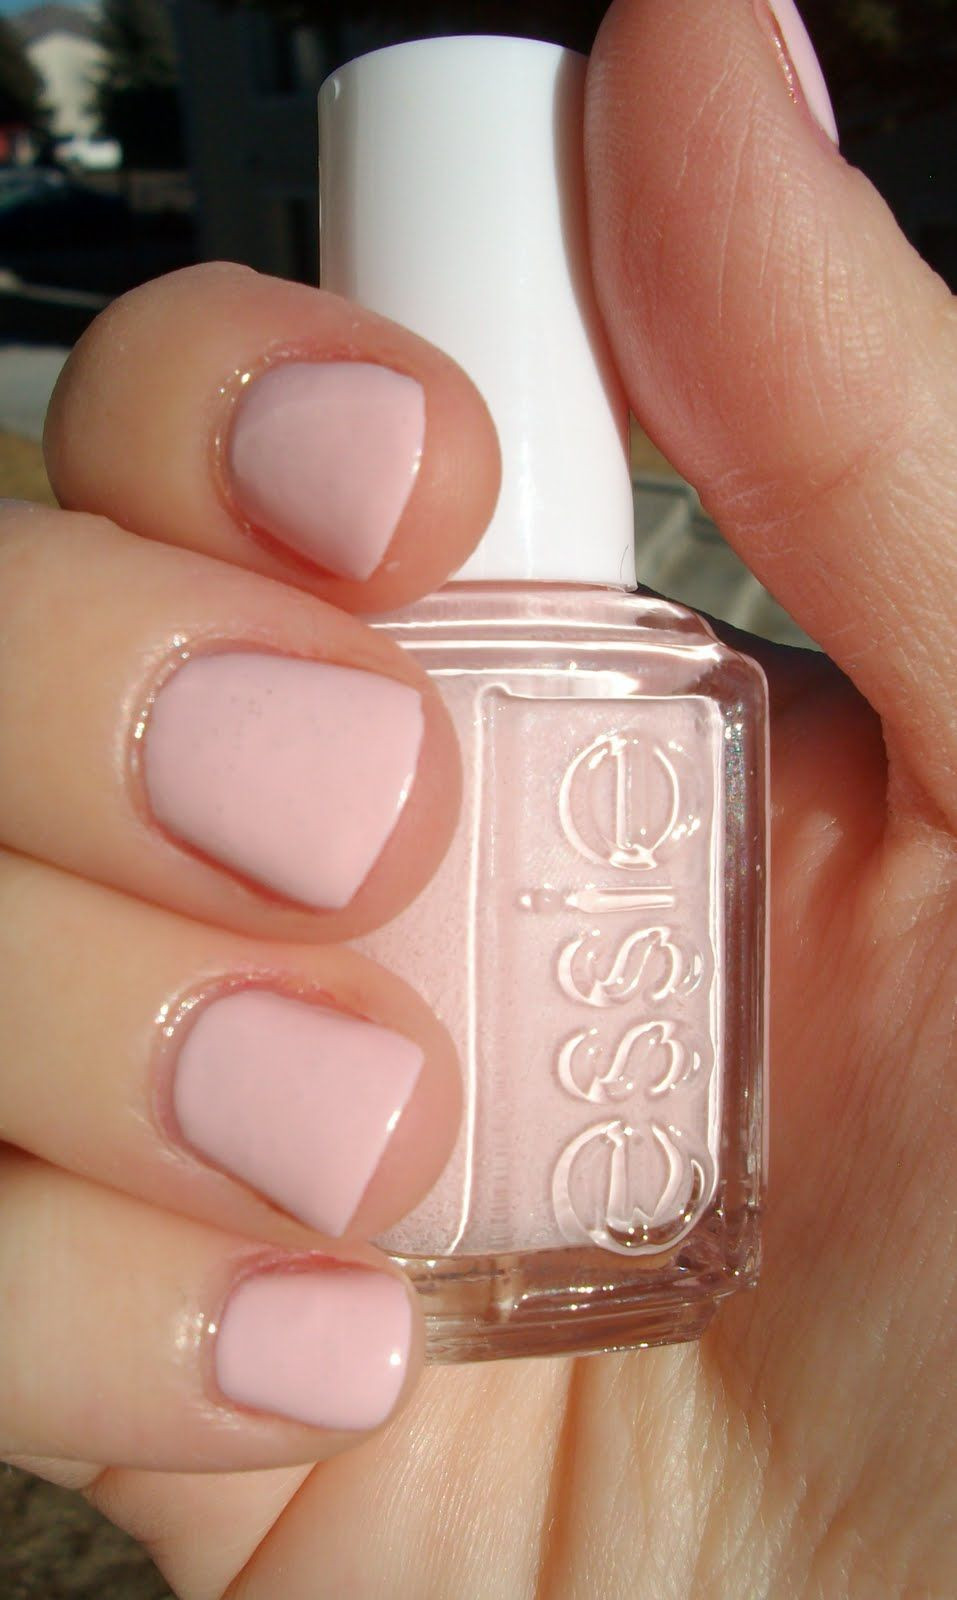 Good Nail Colors For Pale Skin
 Essie Fiji have a similar color on my nails right now